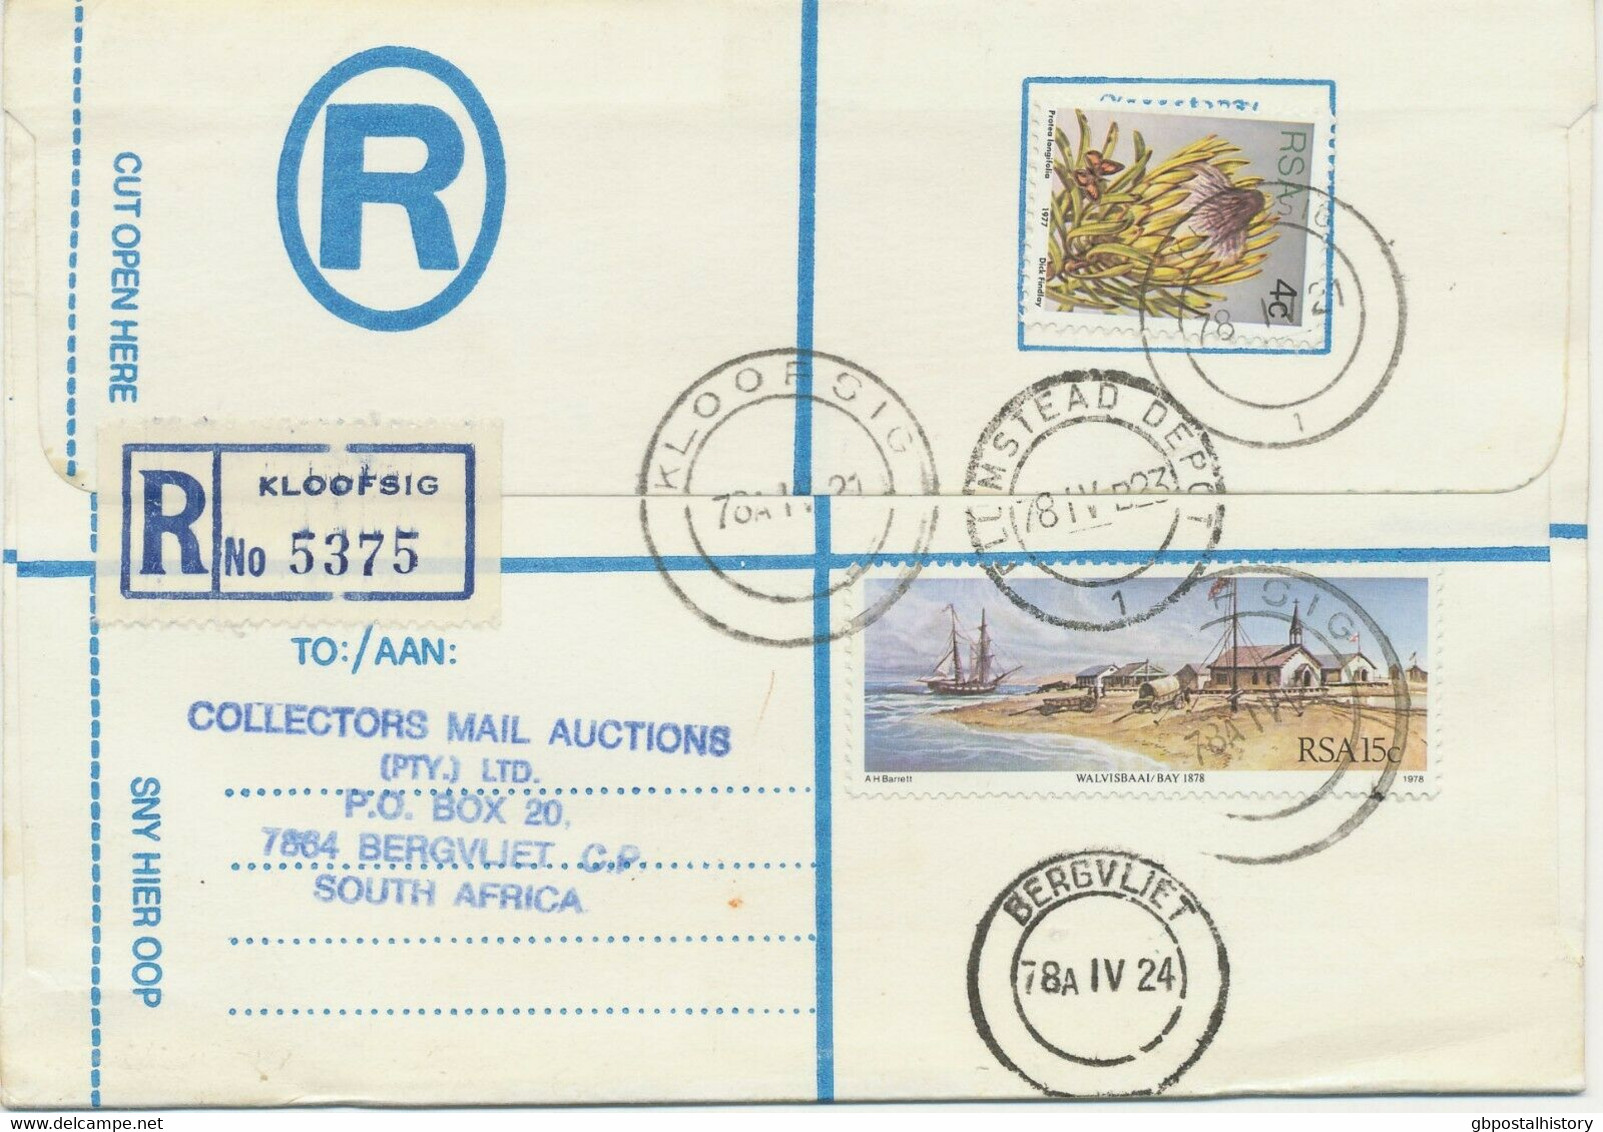 SOUTH AFRICA "KLOOFSIG" (2 Types), "BERGVLIET" And Very Rare "PLUMSTEAD DEPOT" - Covers & Documents